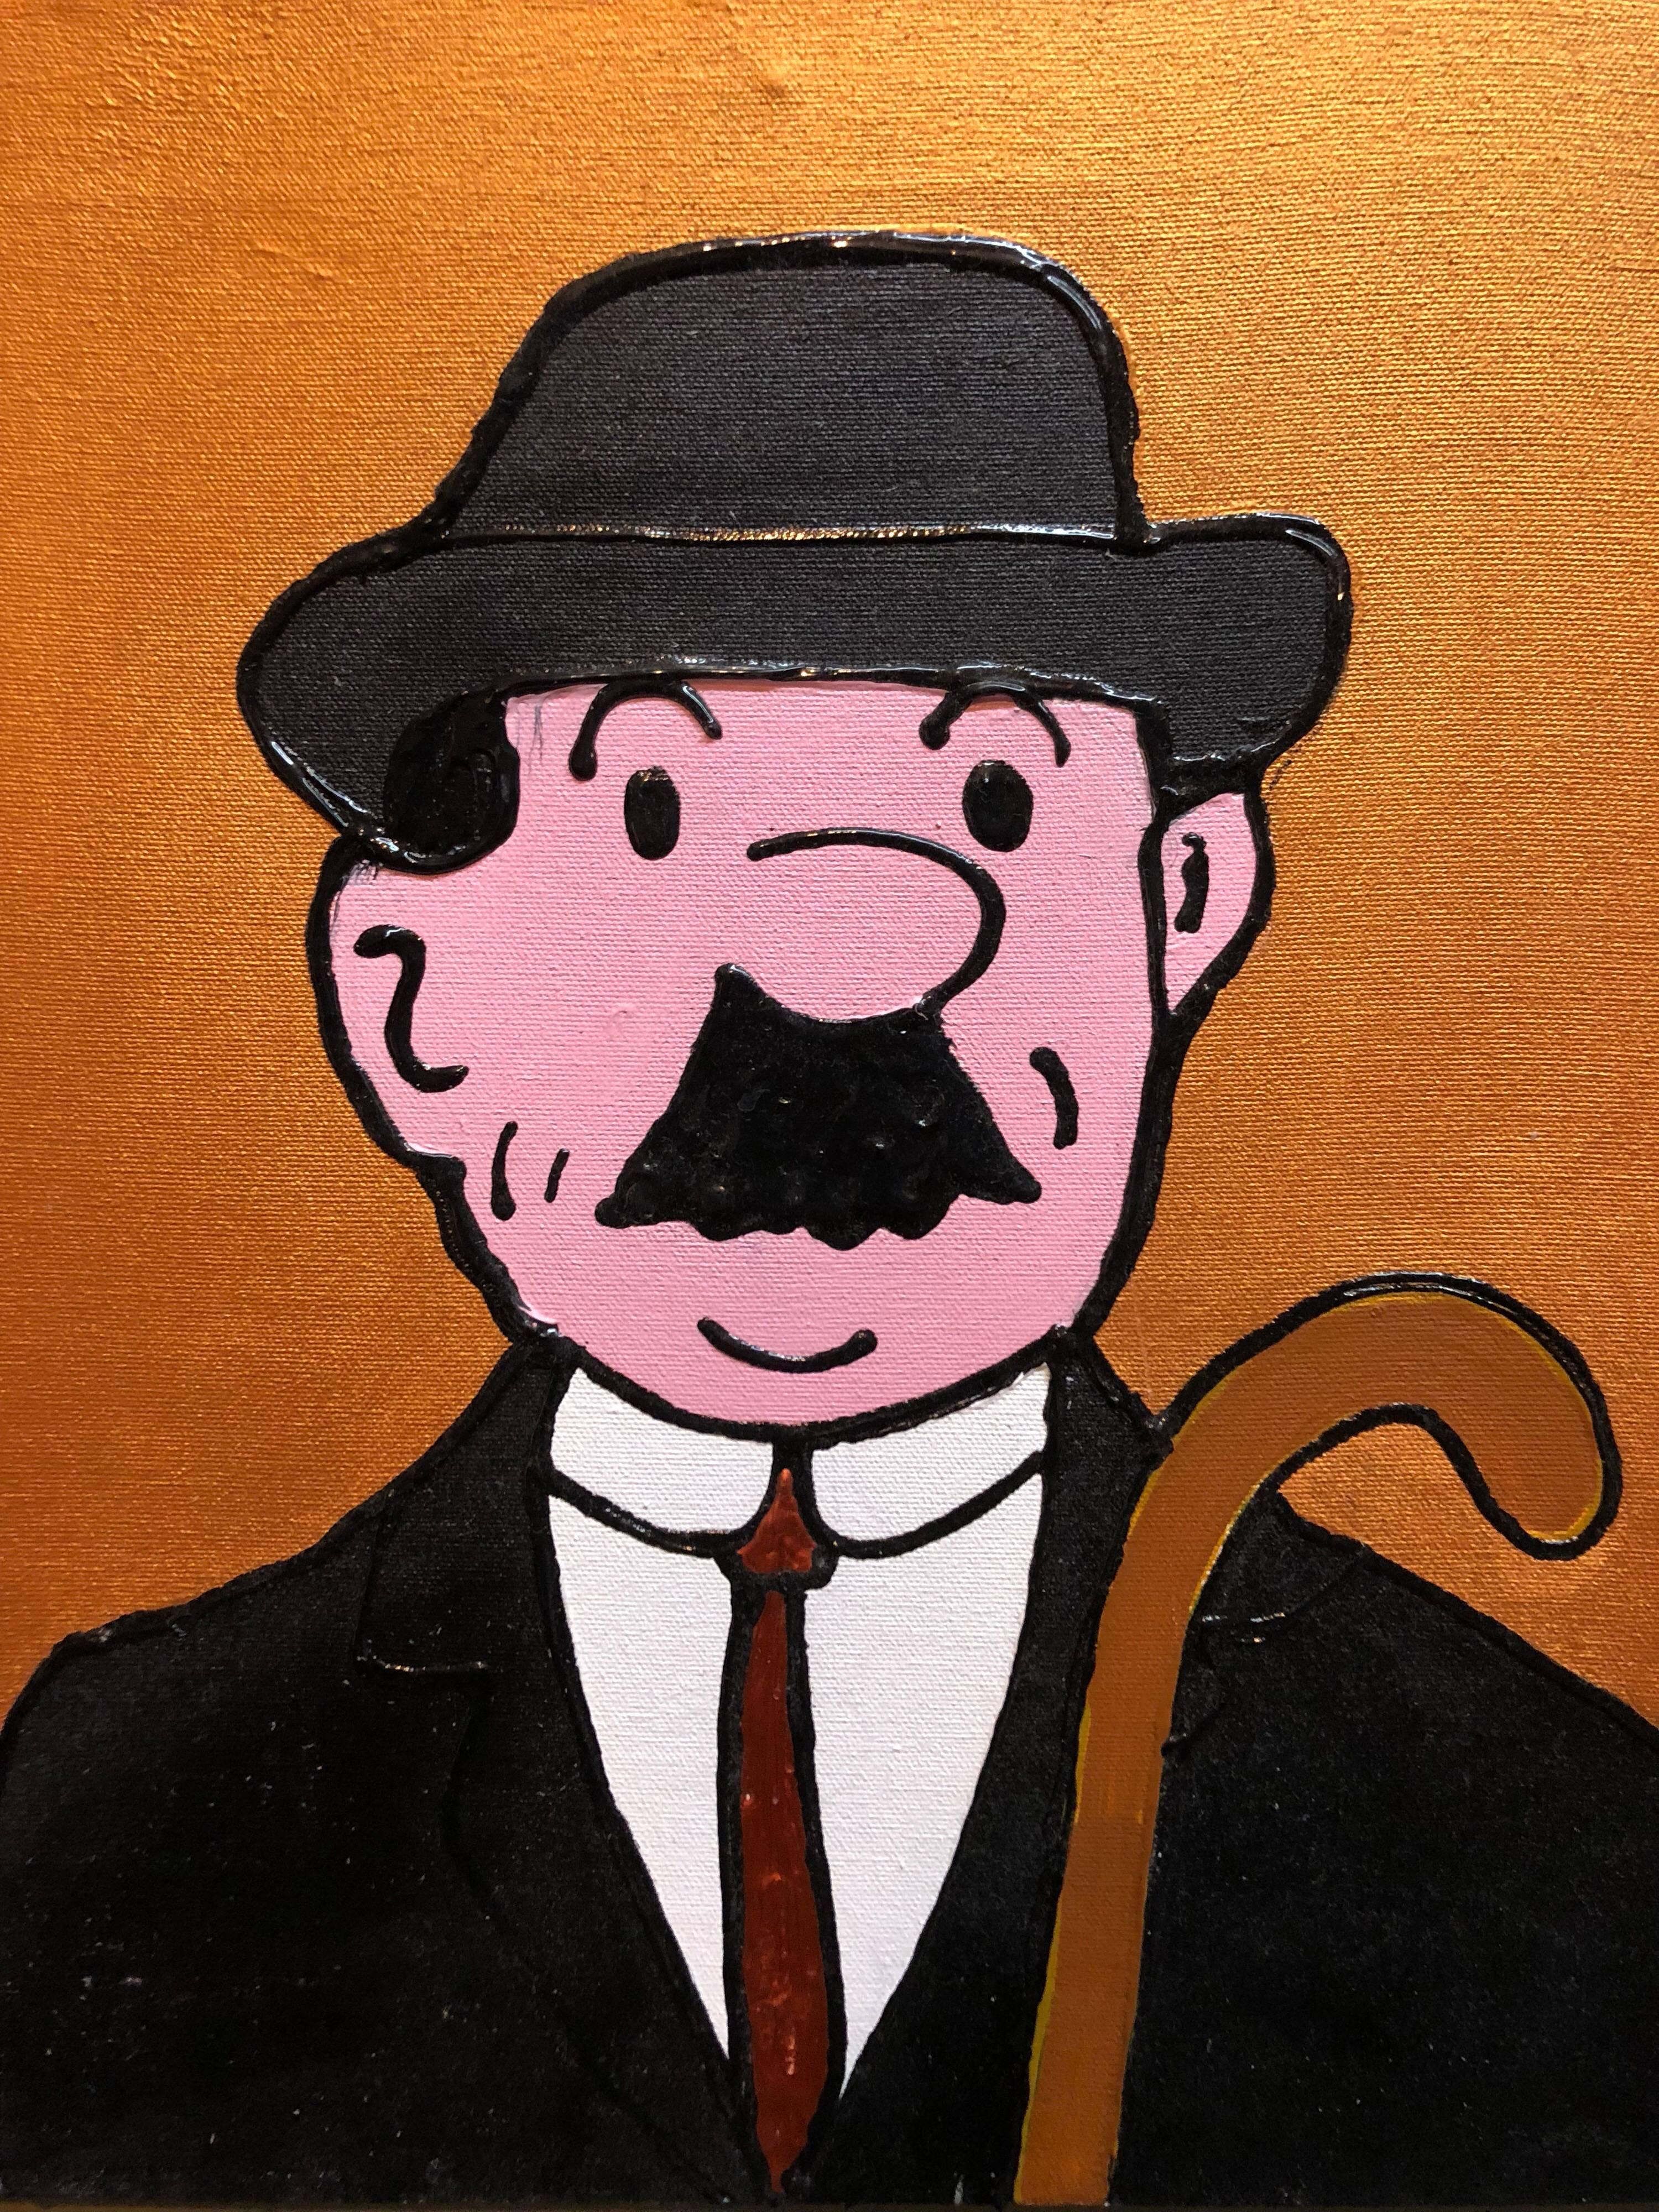 These are the detectives of the Belgian comic book Tintin created by Herge. FER SUCRE is a Venezuelan-born artist now in Wynwood Miami, Florida. He studied graphic design and painting at the Neumann Institute of Design and the Federico Brandt